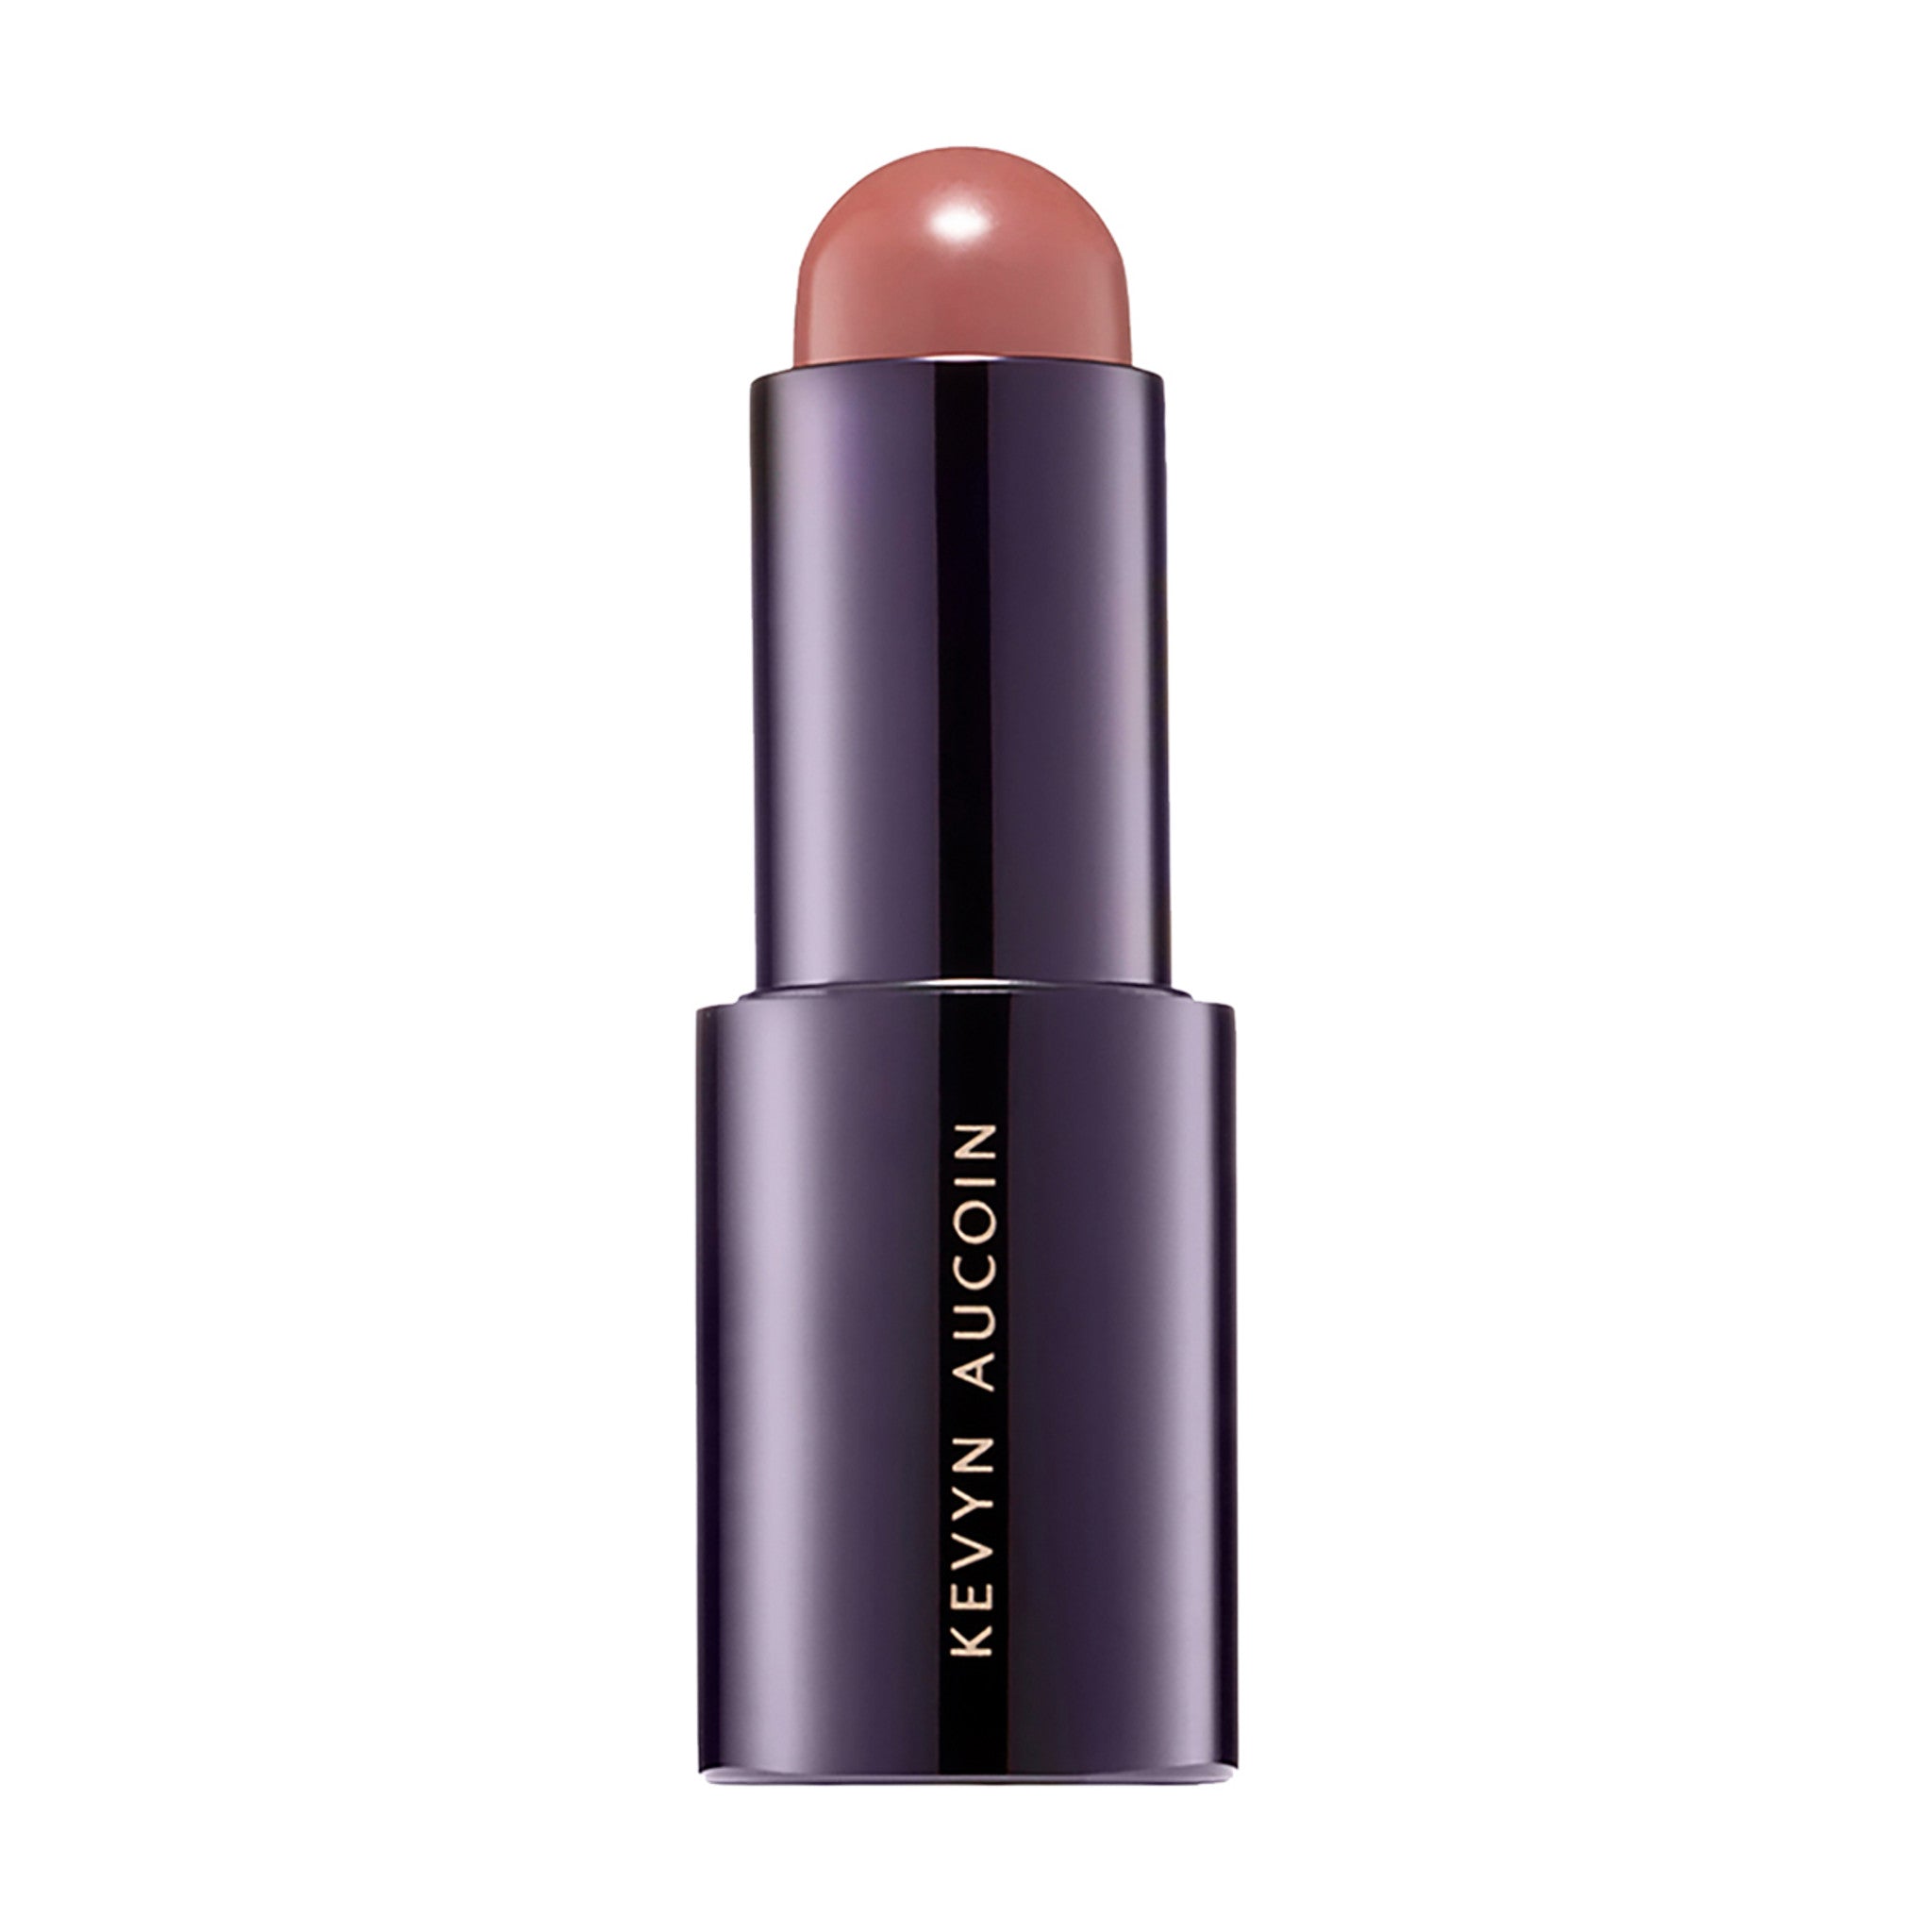 Kevyn Aucoin The Color Stick Color/Shade variant: Awaken main image.